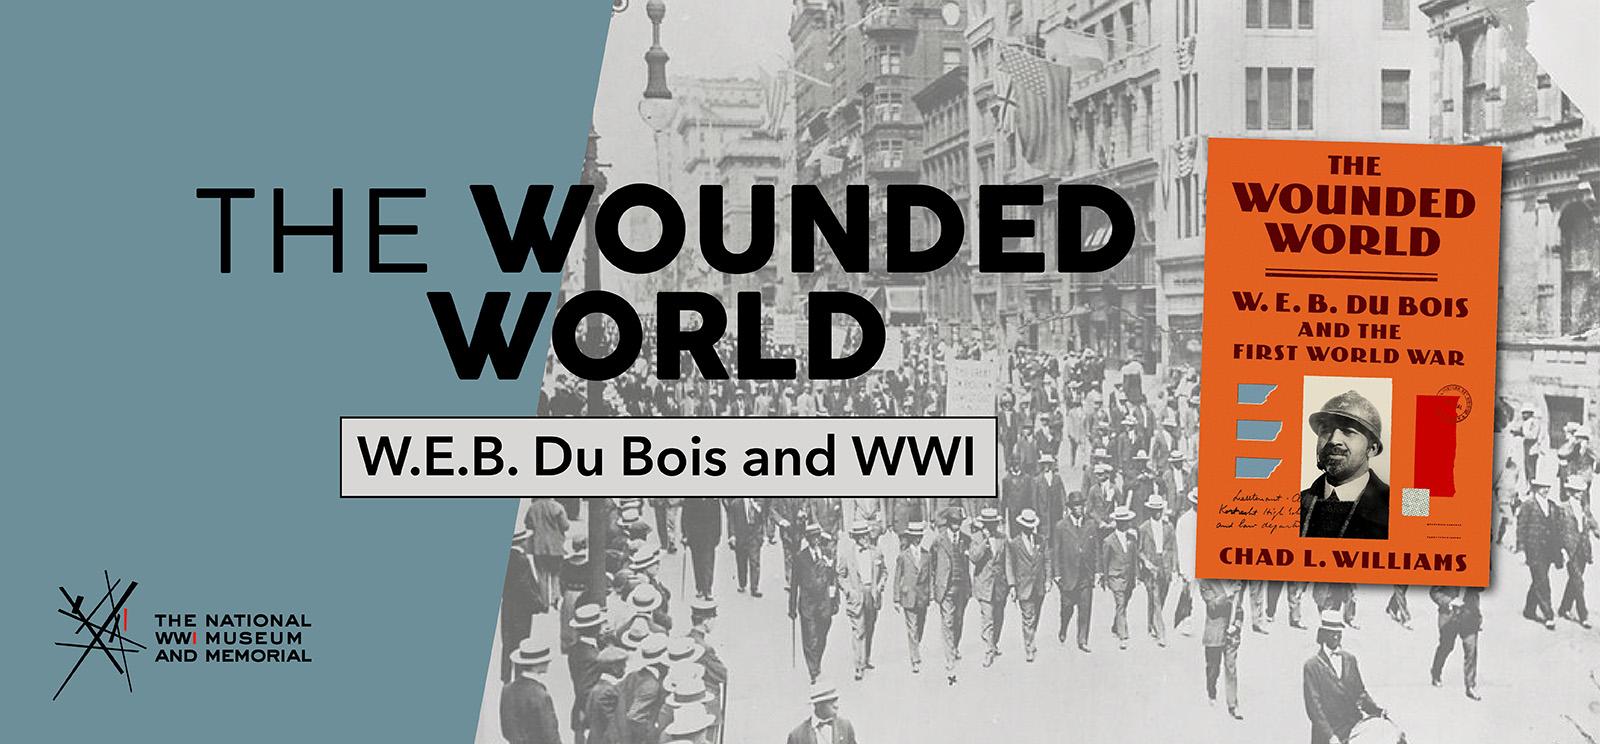 Background image: black and white photograph of rows of Black men in suits walking down a city street. Foreground image: an orange book cover featuring a black and white portrait photograph of a Black man wearing a doughboy helmet. Text: 'The Wounded World / W.E.B. Du Bois and WWI'